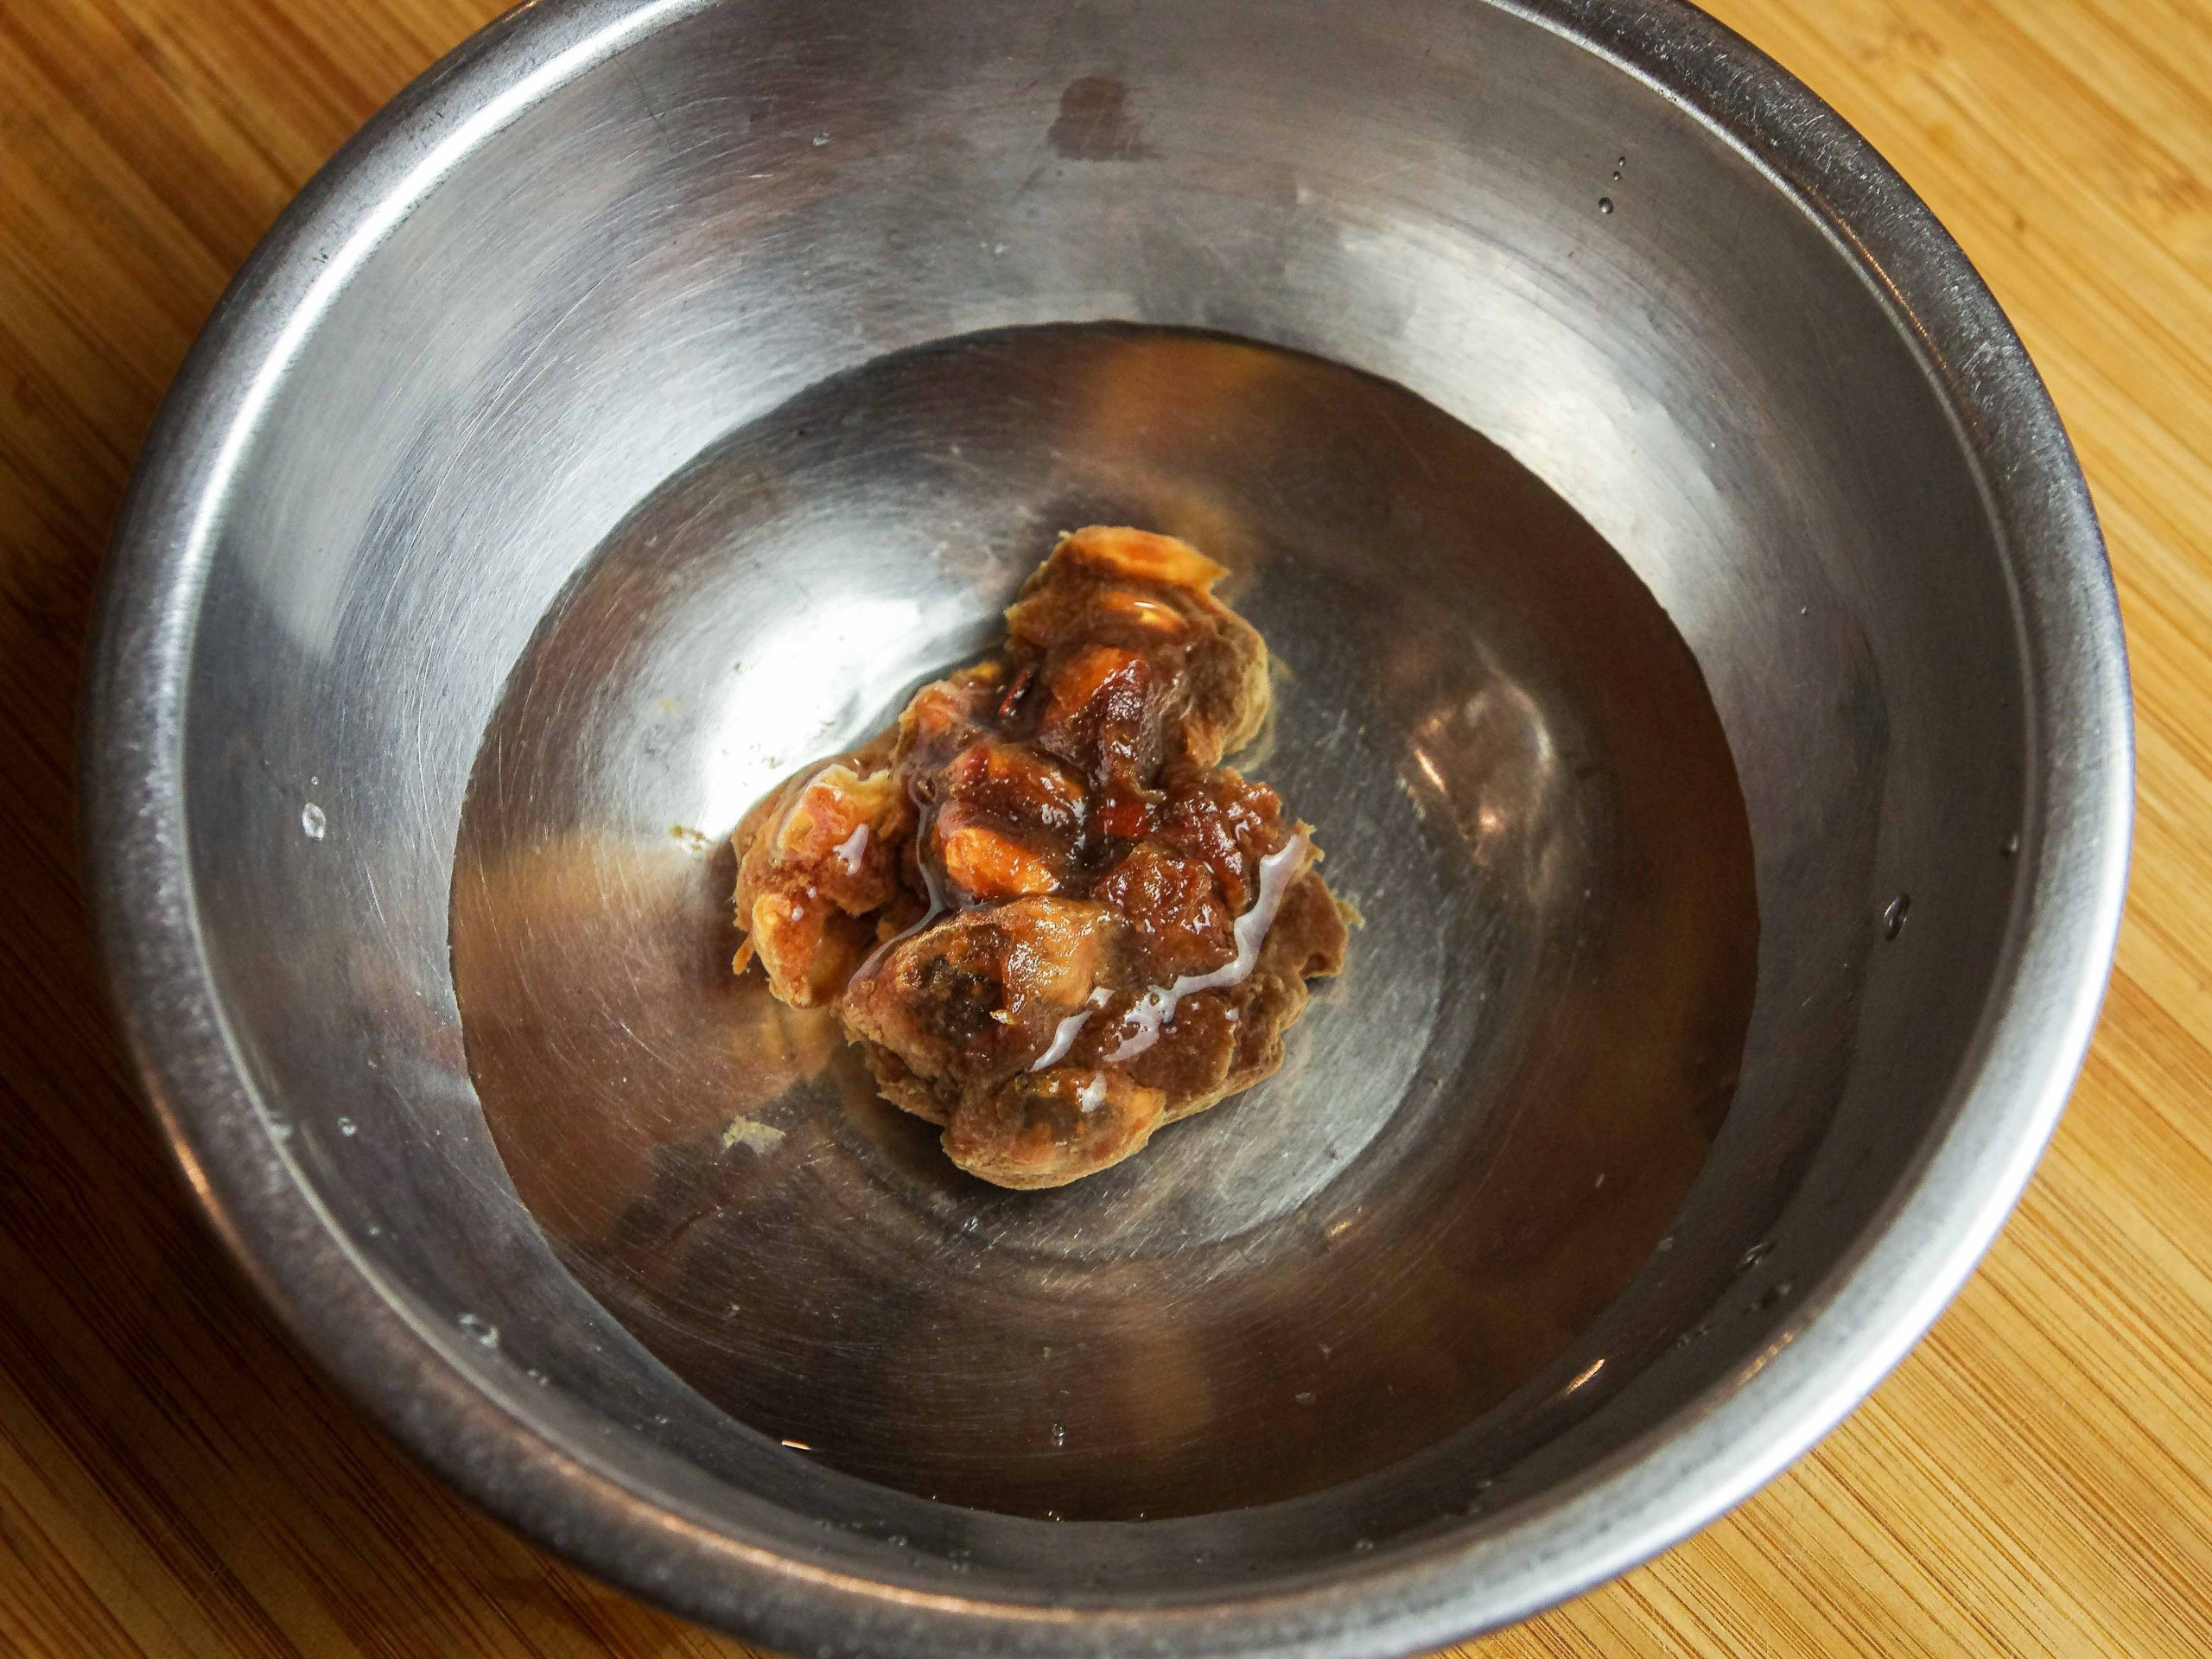 Soaked asam jawa in a metal bowl, on a wooden board,